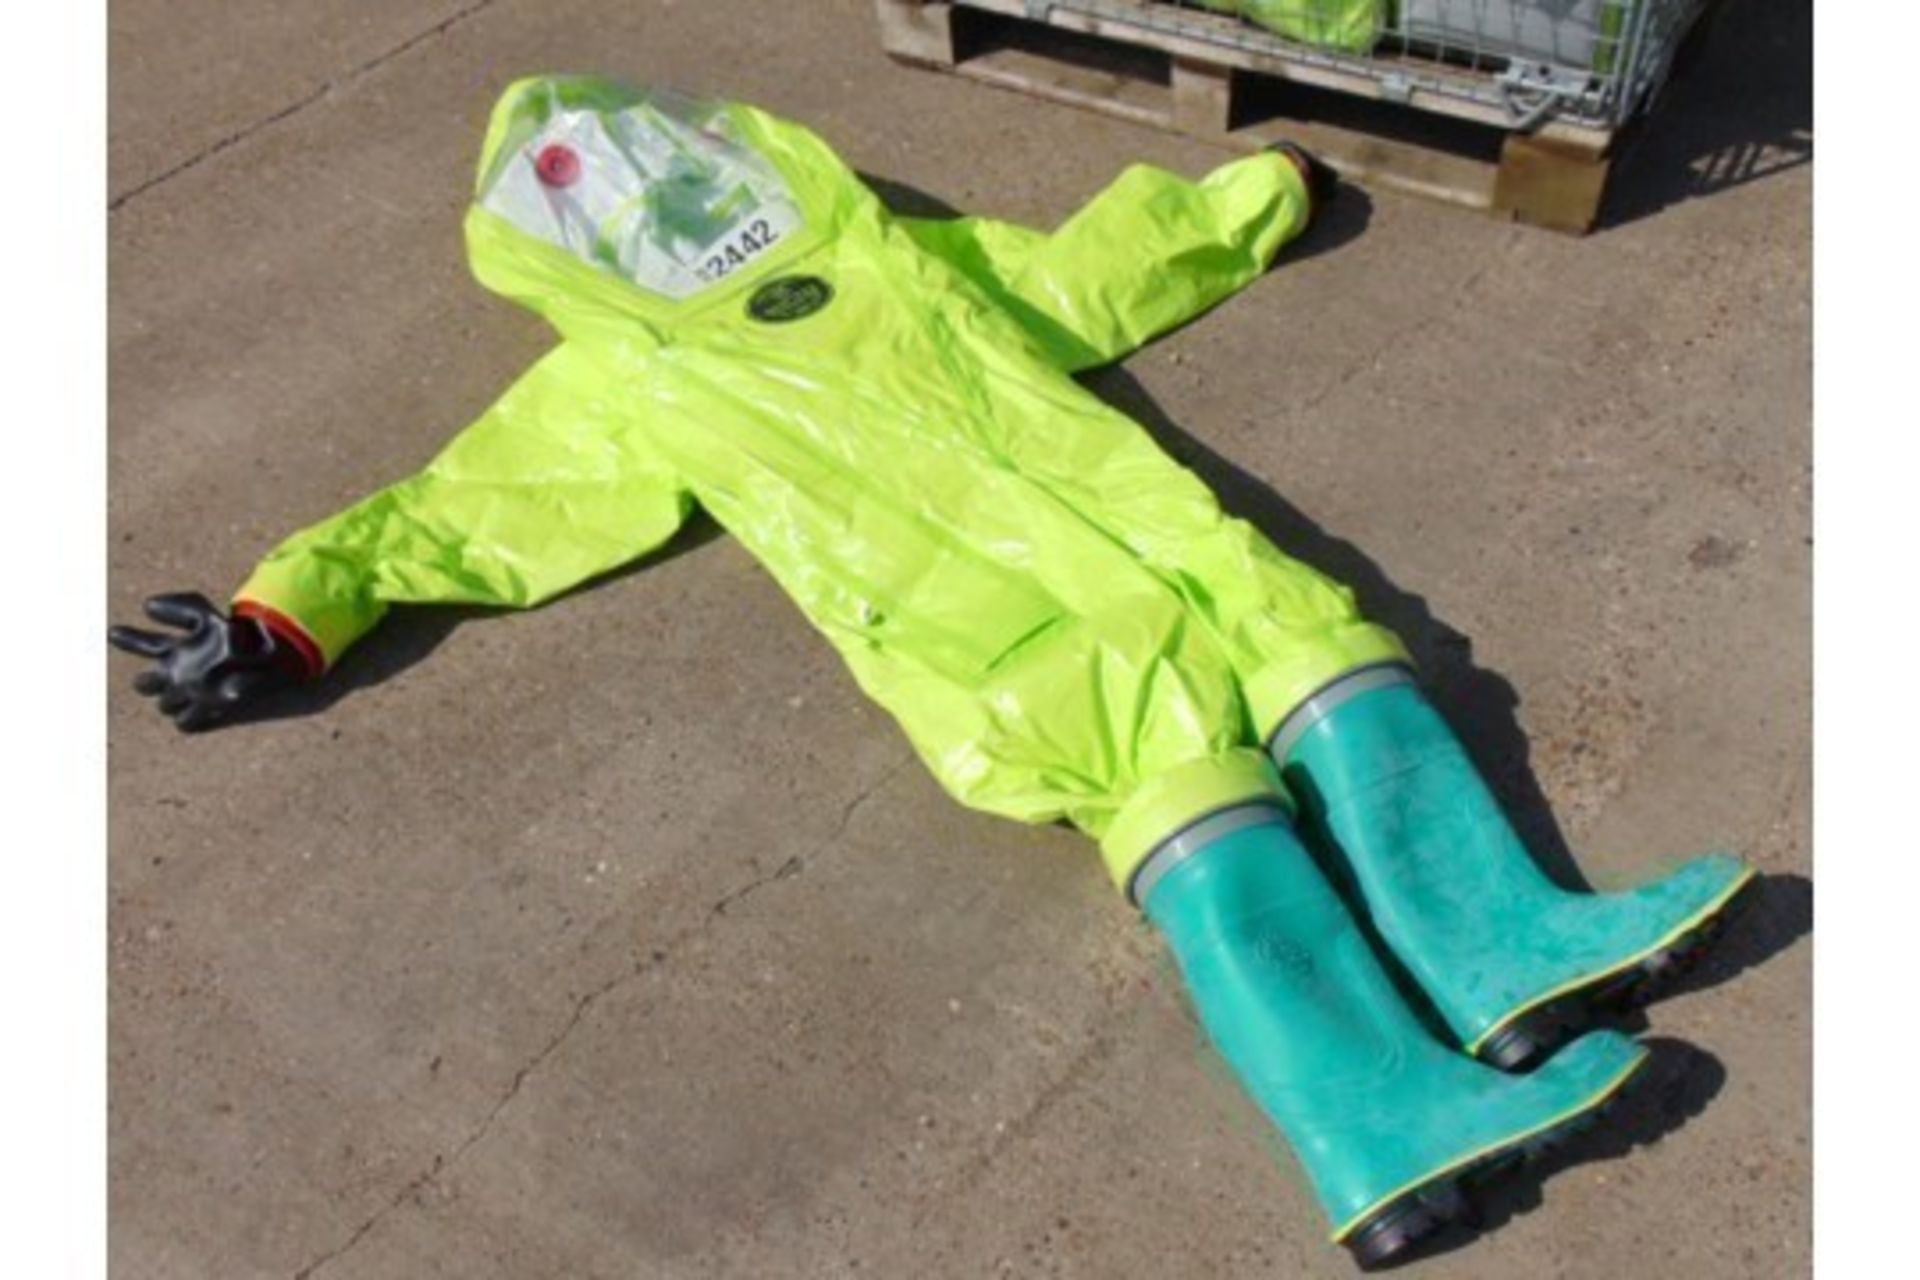 1 x Unissued Respirex Tychem TK Gas-Tight Hazmat Suit Type 1A with Attached Boots and Gloves. Medium - Image 6 of 8